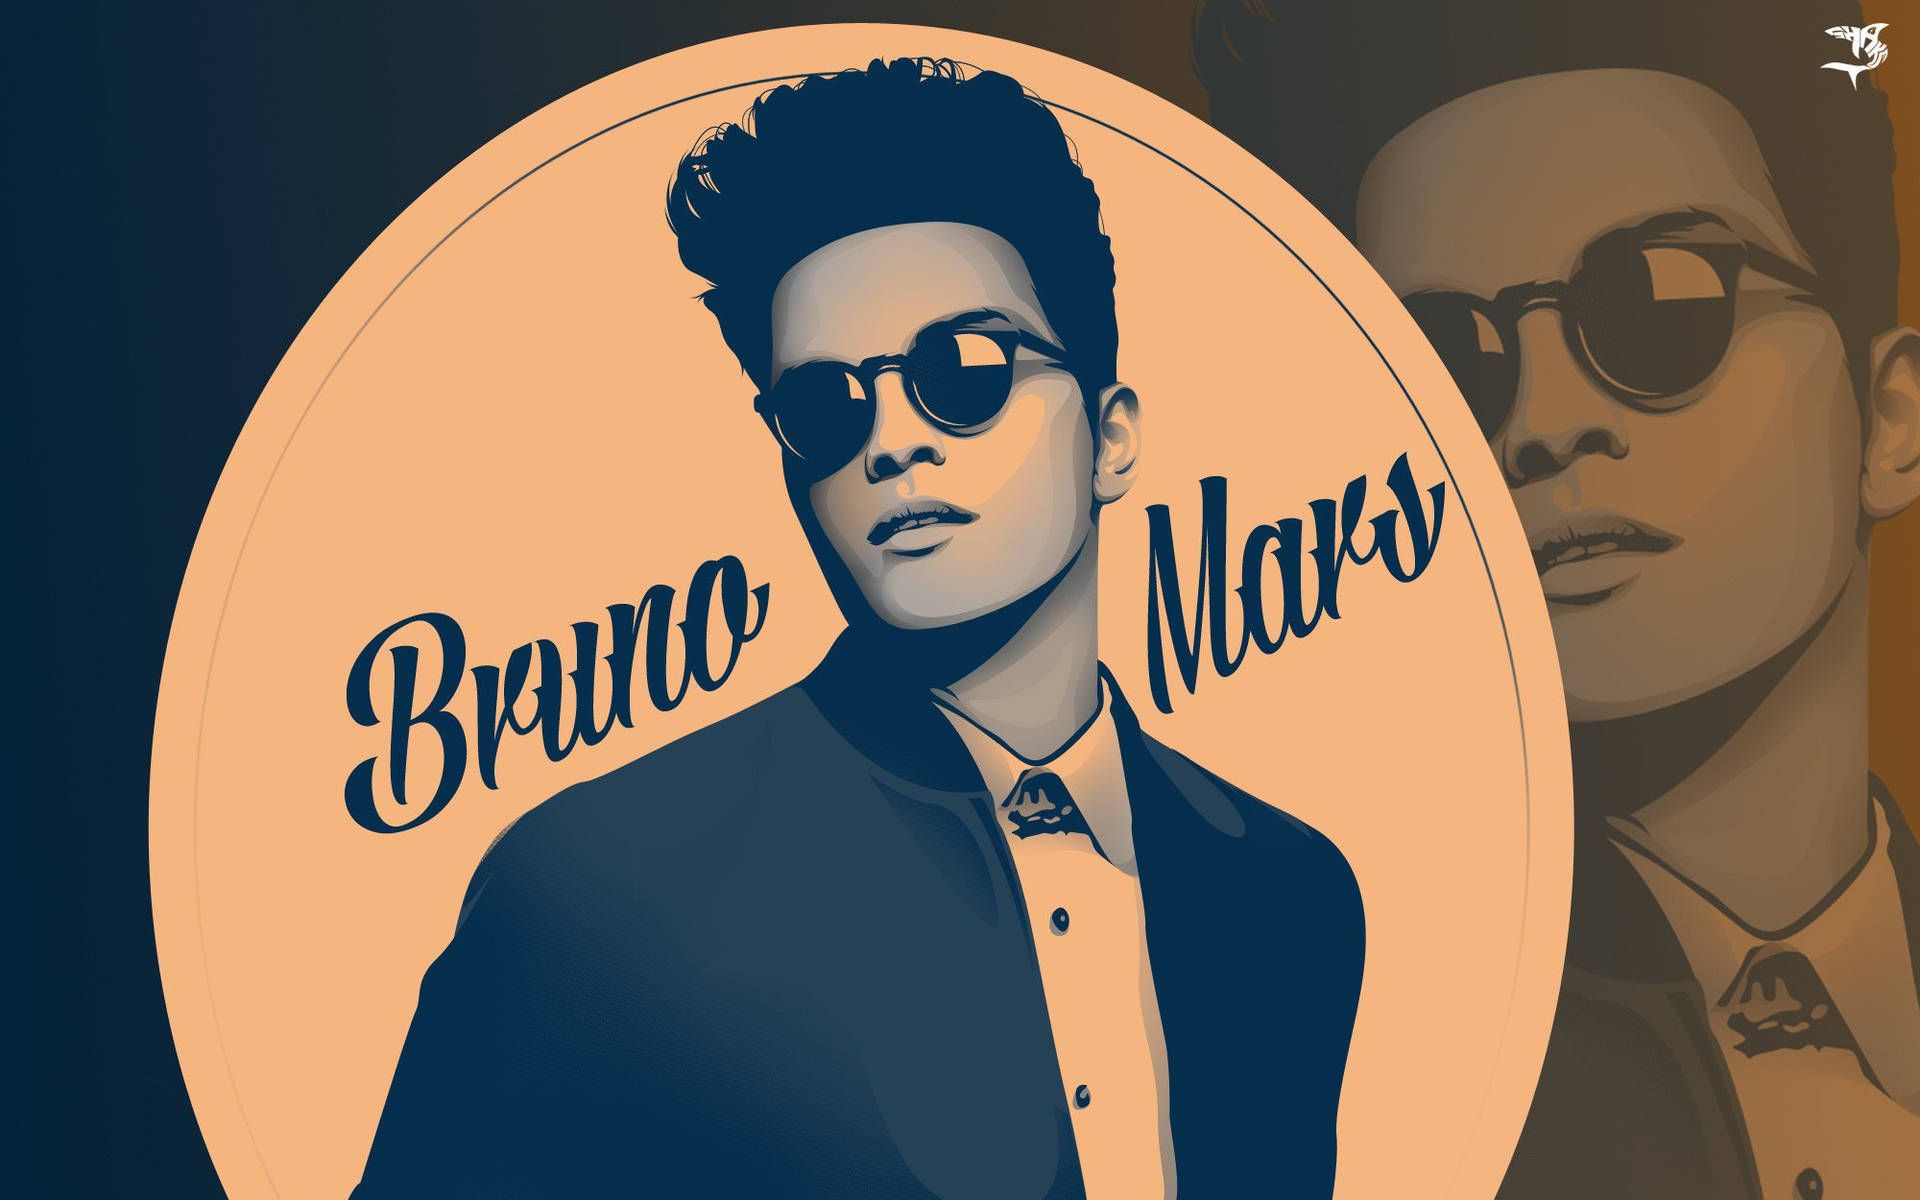 Bruno Mars Wallpaper HD with high-resolution 1920x1080 pixel. You can use this wallpaper for your Windows and Mac OS computers as well as your Android and iPhone smartphones - Bruno Mars